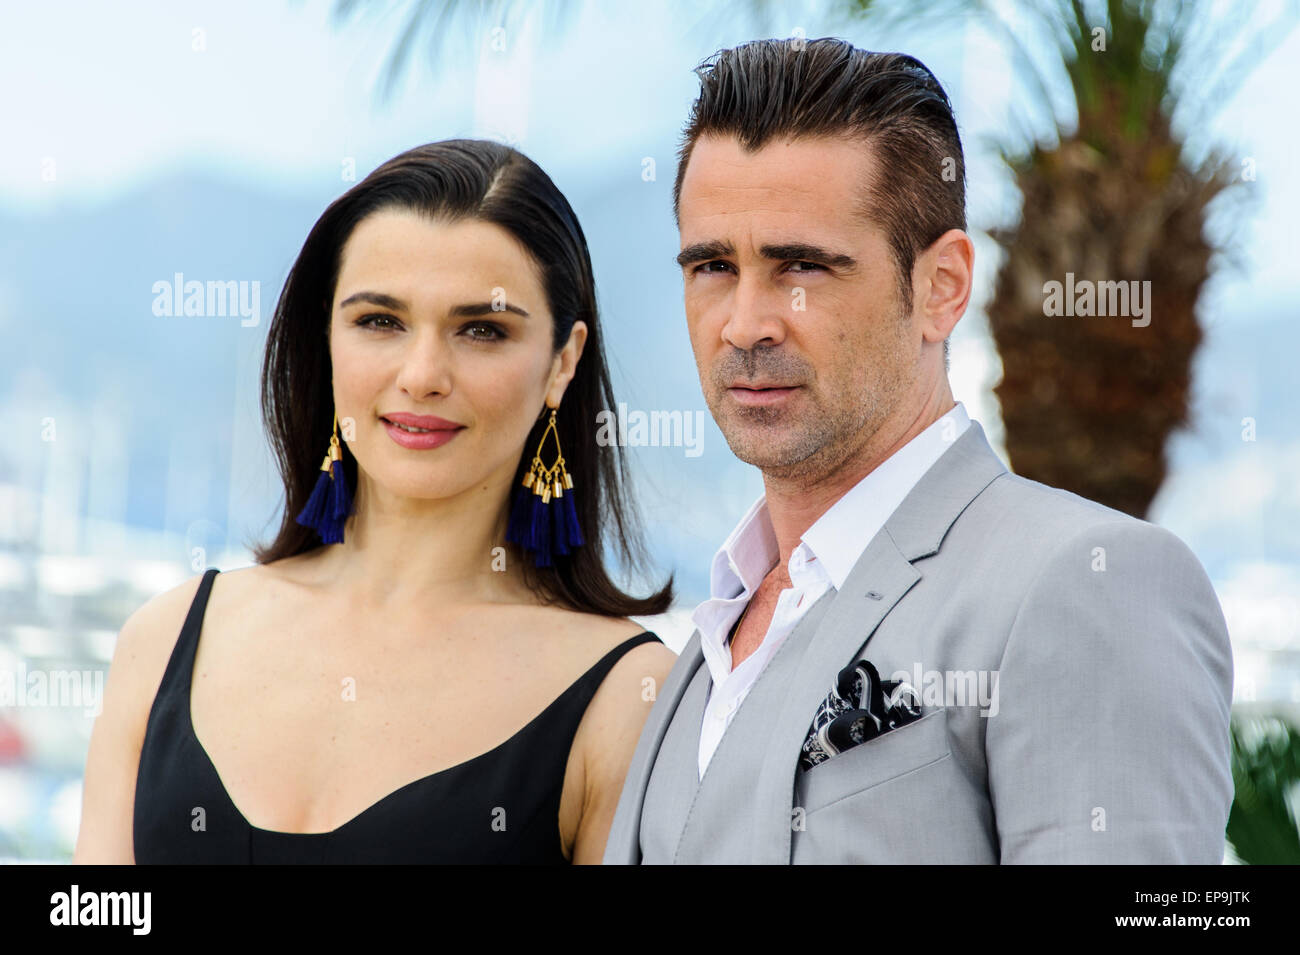 Cannes, France. 15th May, 2015. Rachel Weisz and Colin Farrell at a photocall for 'The Lobster' 68th Cannes Film Festival 2015,  Palais Du Festival, Cannes, France  on 15th May 2015 Credit:  James McCauley/Alamy Live News Stock Photo